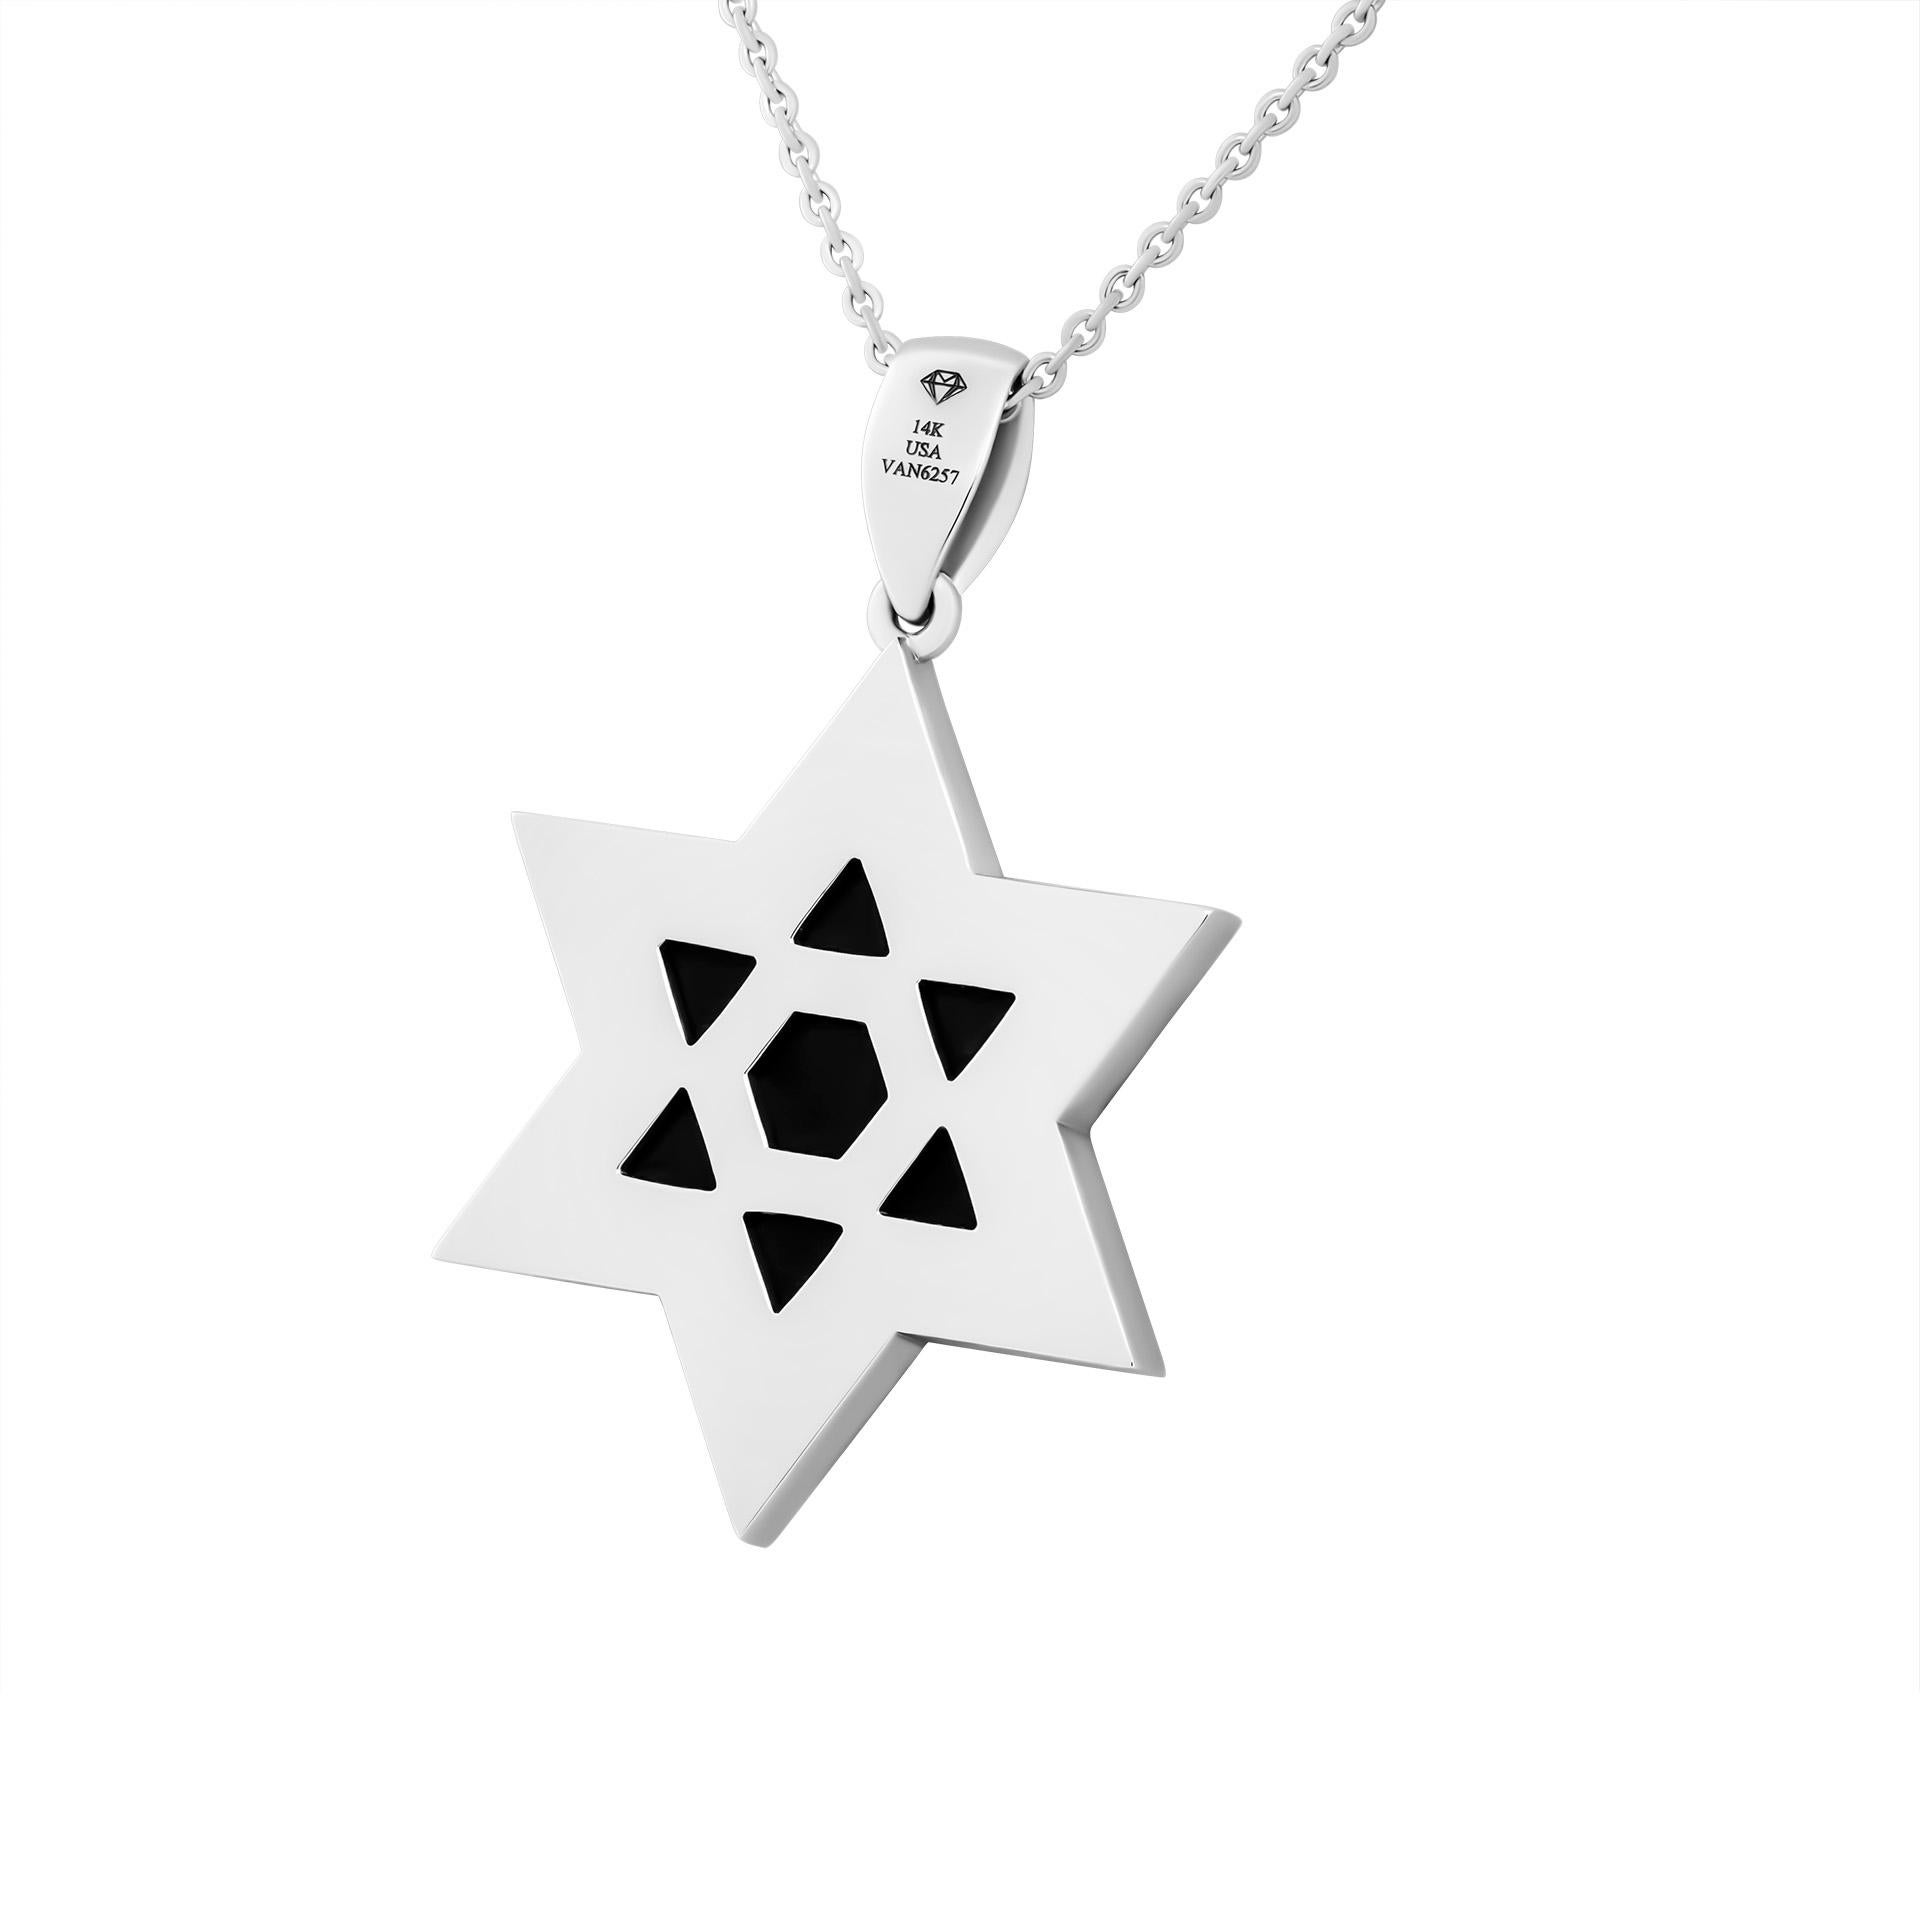 ONYX STAR OF DAVID Pendant in 14K White Gold
Black Onyx Star Of David in 14k WG Pendant Dimensions: 1.5 x 1 inches (38x25mm)

(no chain)